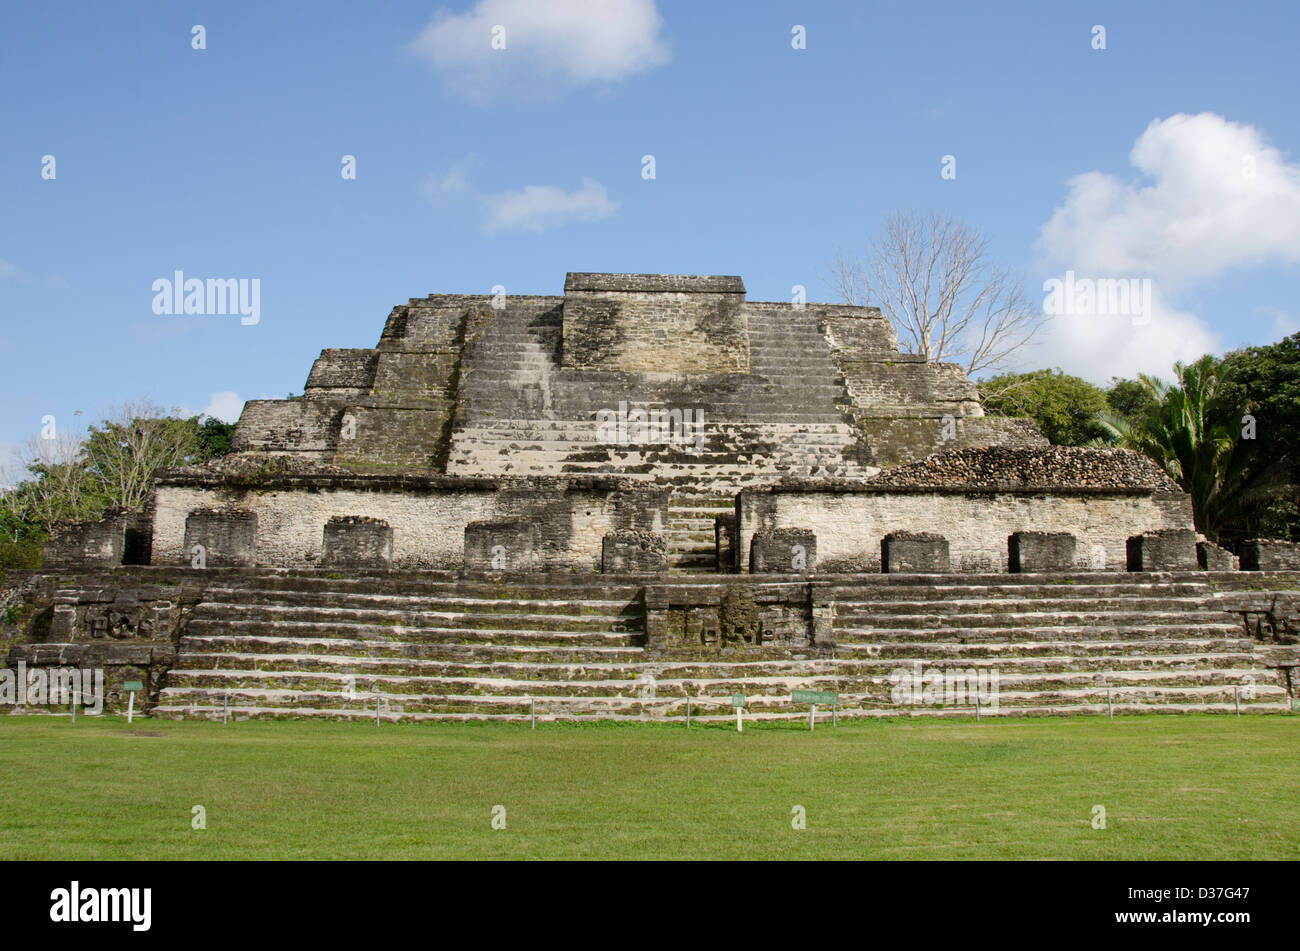 Belize, Altun Ha. Altun Ha, ruins of ancient Mayan ceremonial site from the Classic Period (1100 BC to AD 900). Stock Photo